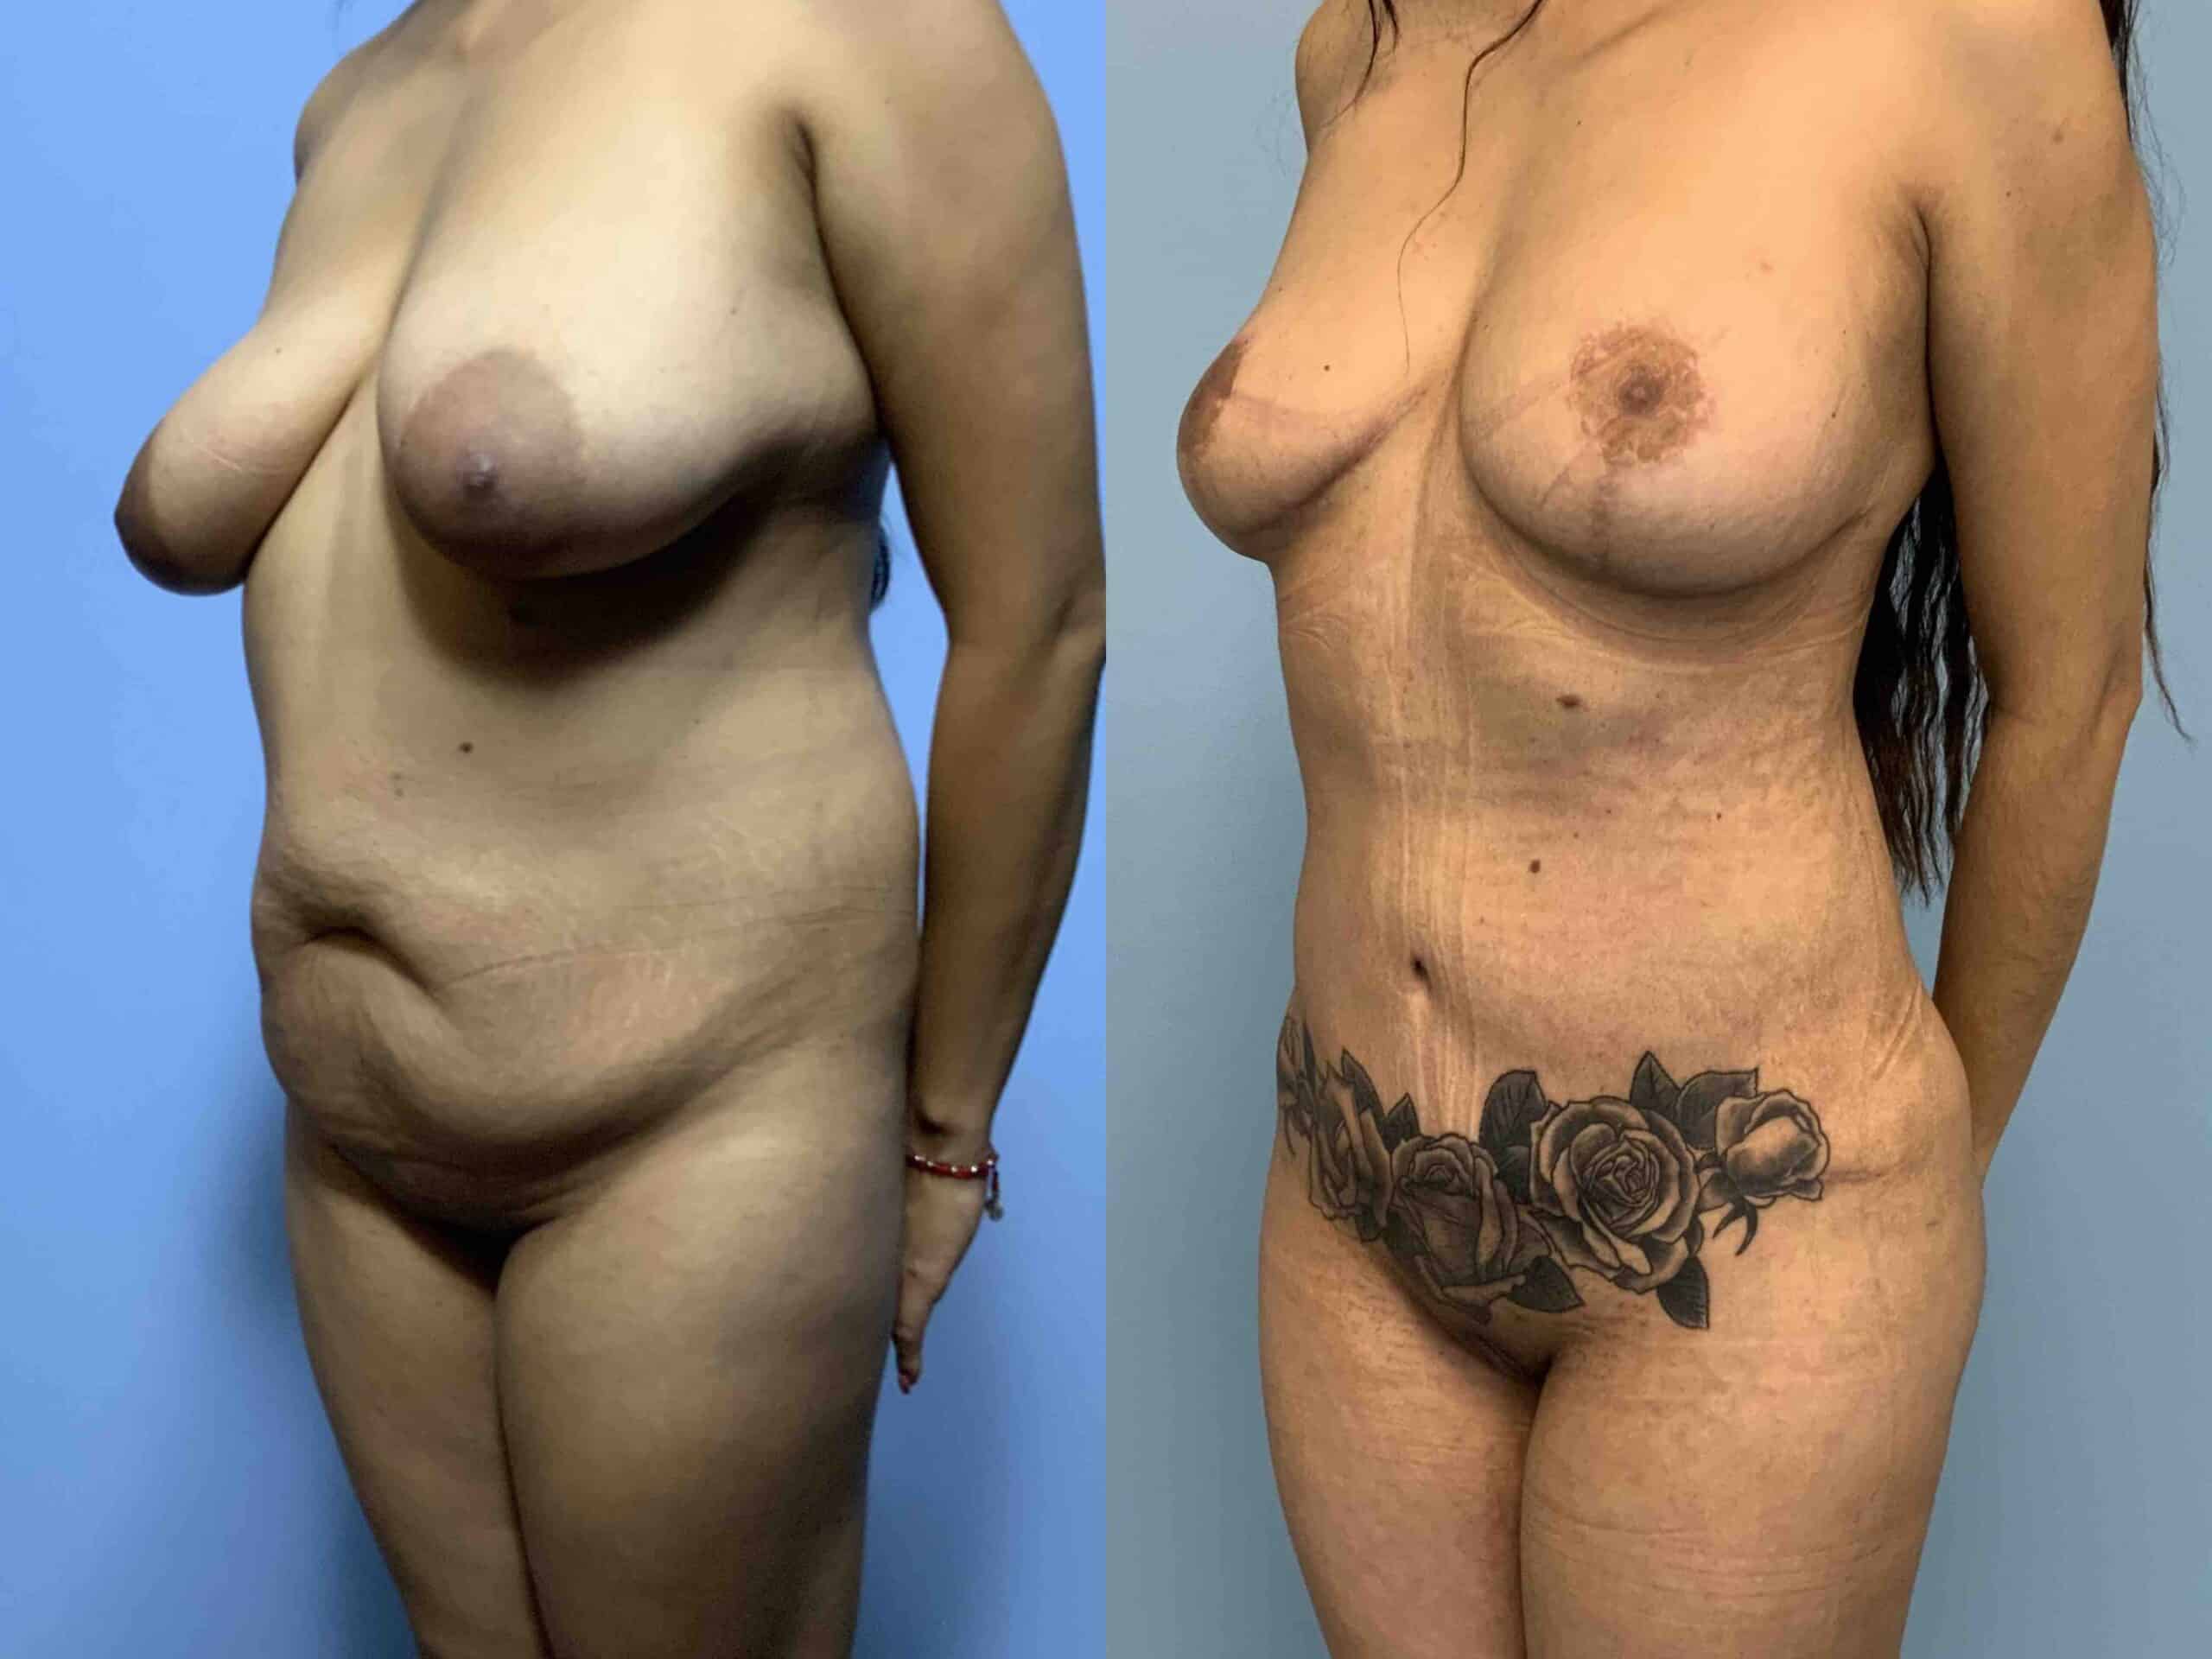 Before and after, patient 1 yr post op from VASER Abdomen, Flanks, Back Axilla, Brazilian Butt Lift, Mastopexy/Breast Lift, Panniculectomy (lower tummy tuck), and Renuvion Abdomen, Flanks, Back Axilla procedures performed by Dr. Paul Vanek